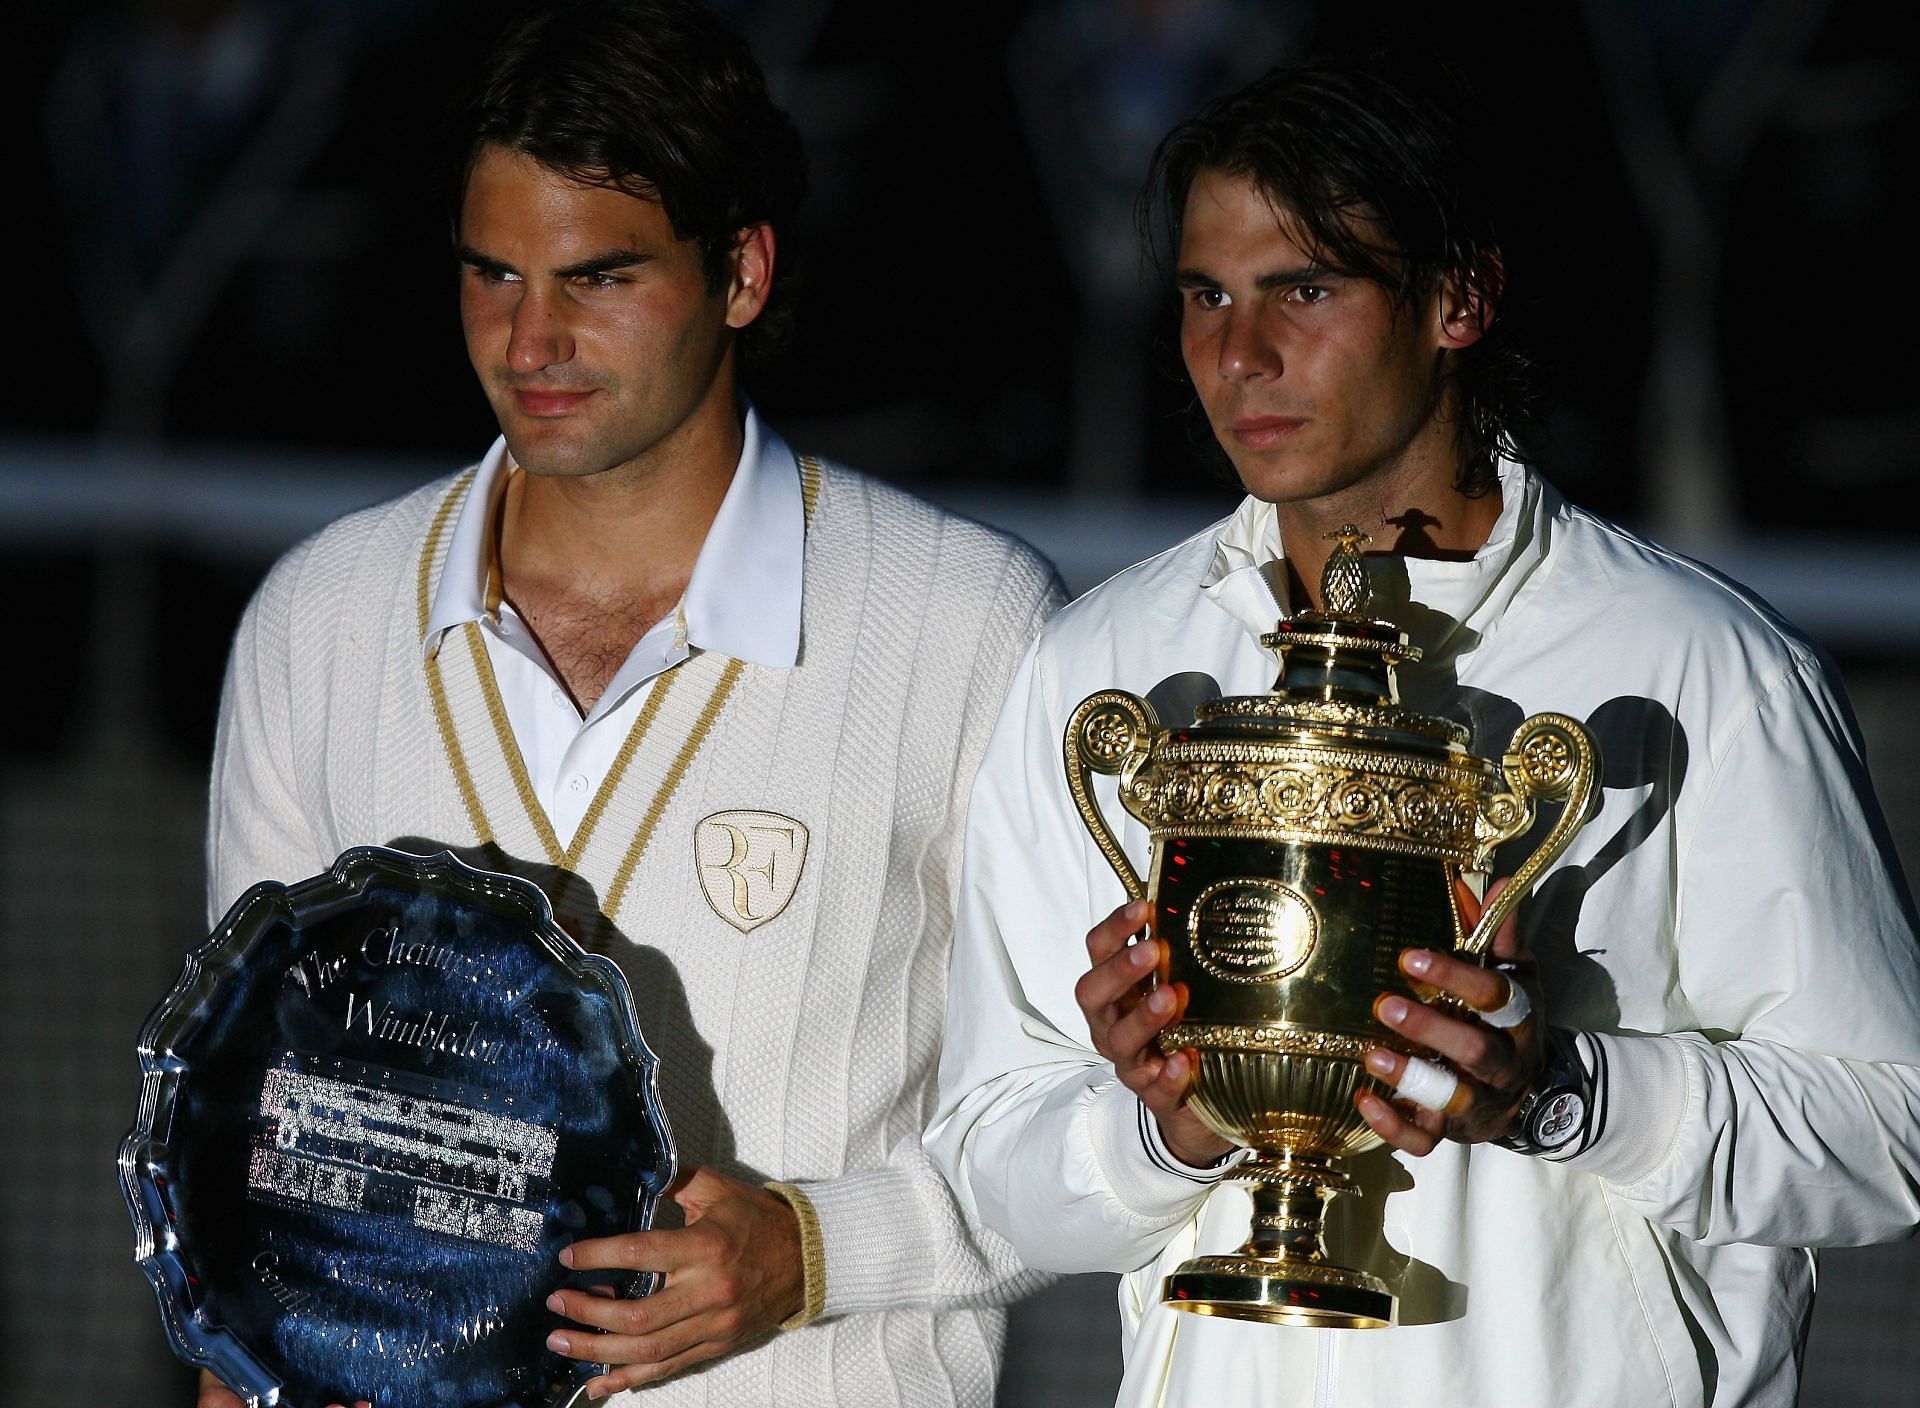 Roger Federer and Rafael Nadal at the 2008 Wimbledon Championships.